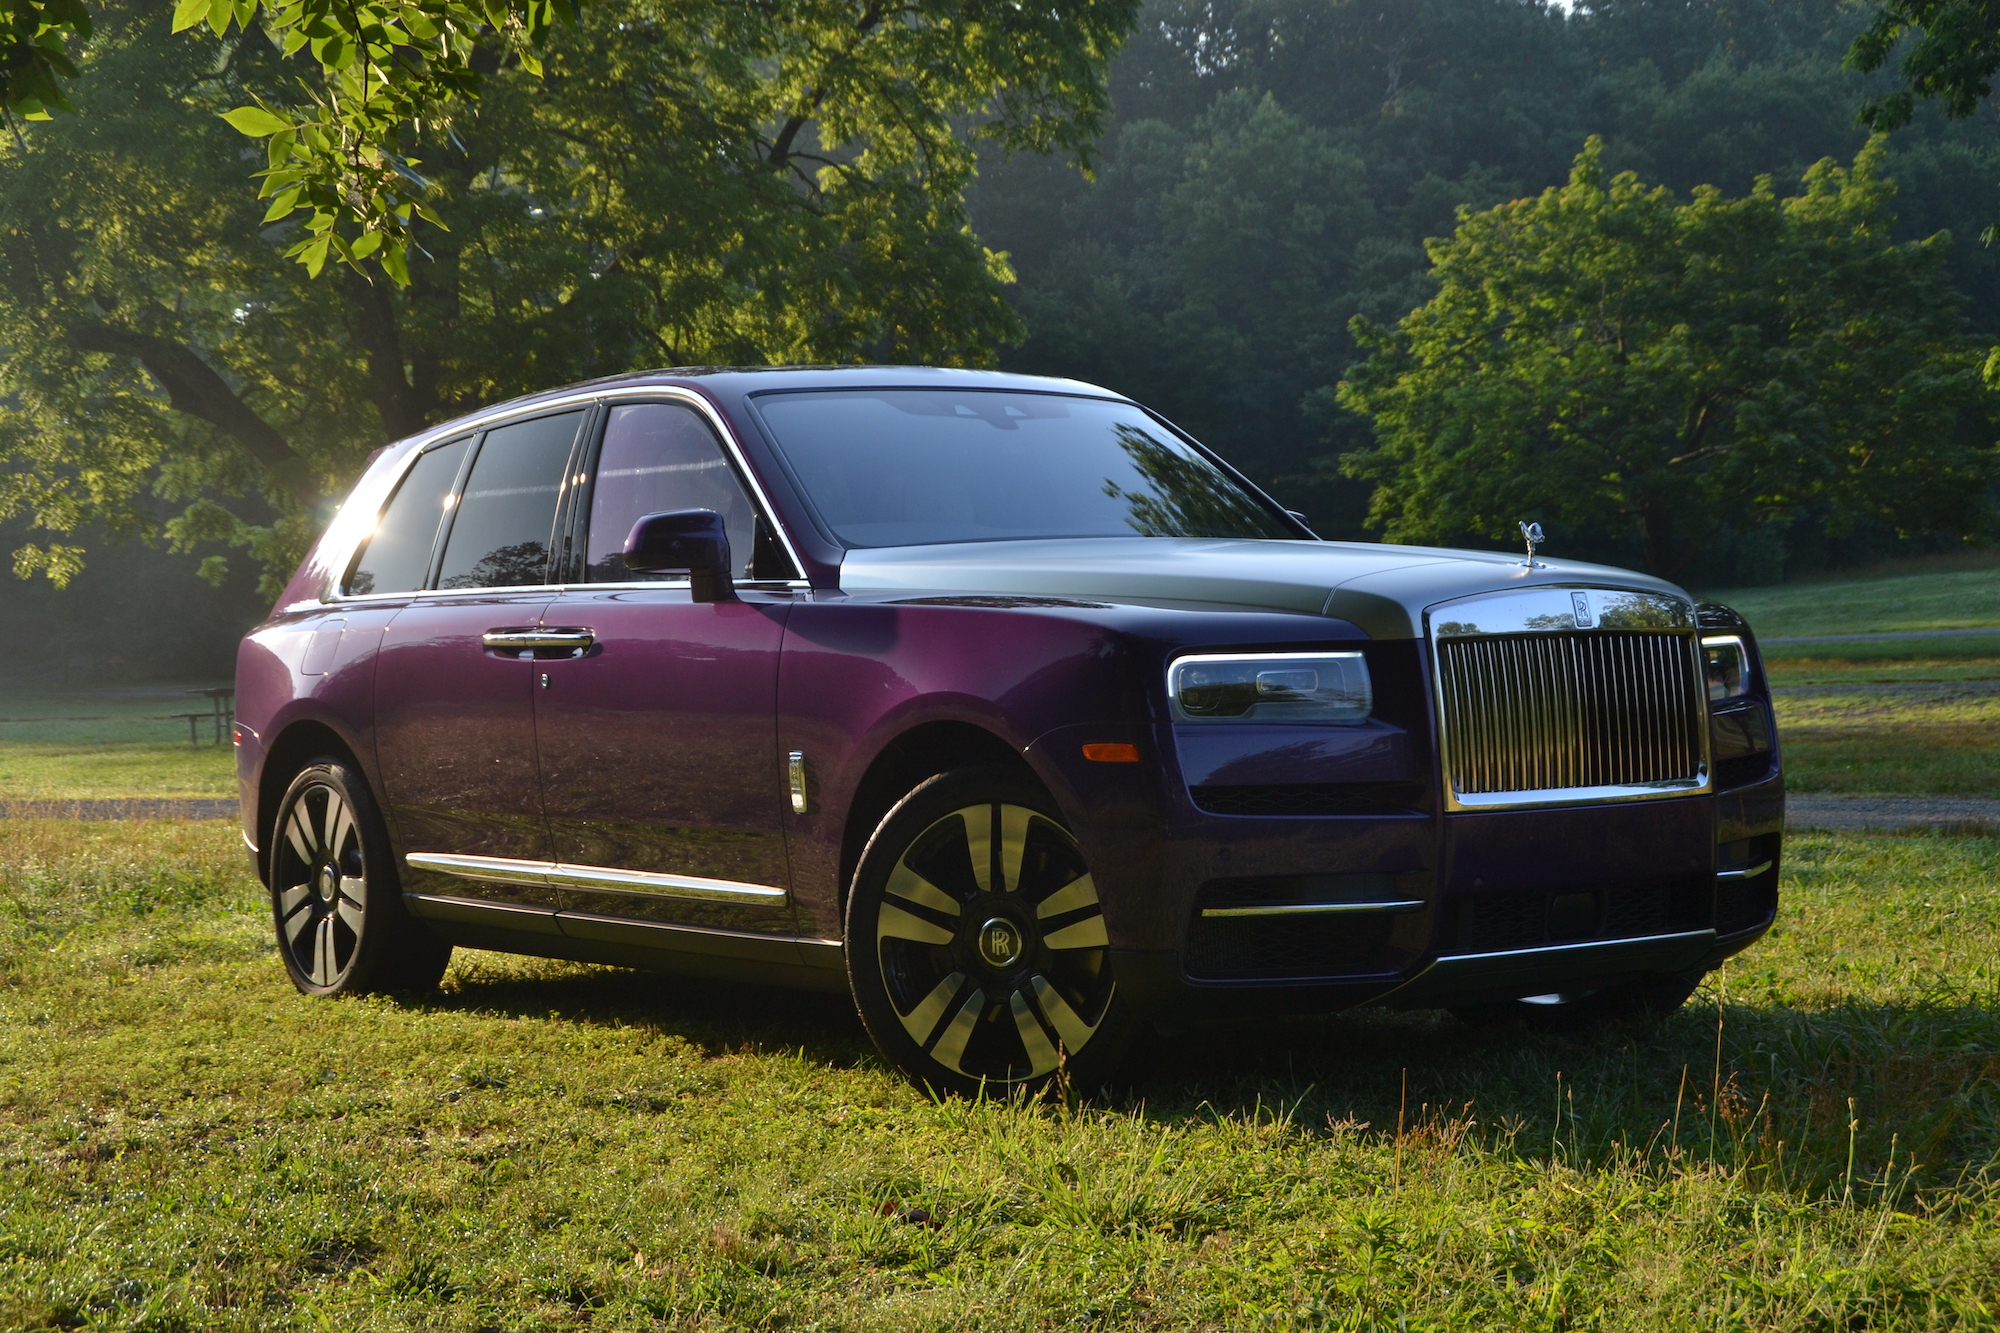 The first RollsRoyce SUV has tricks that might actually justify its